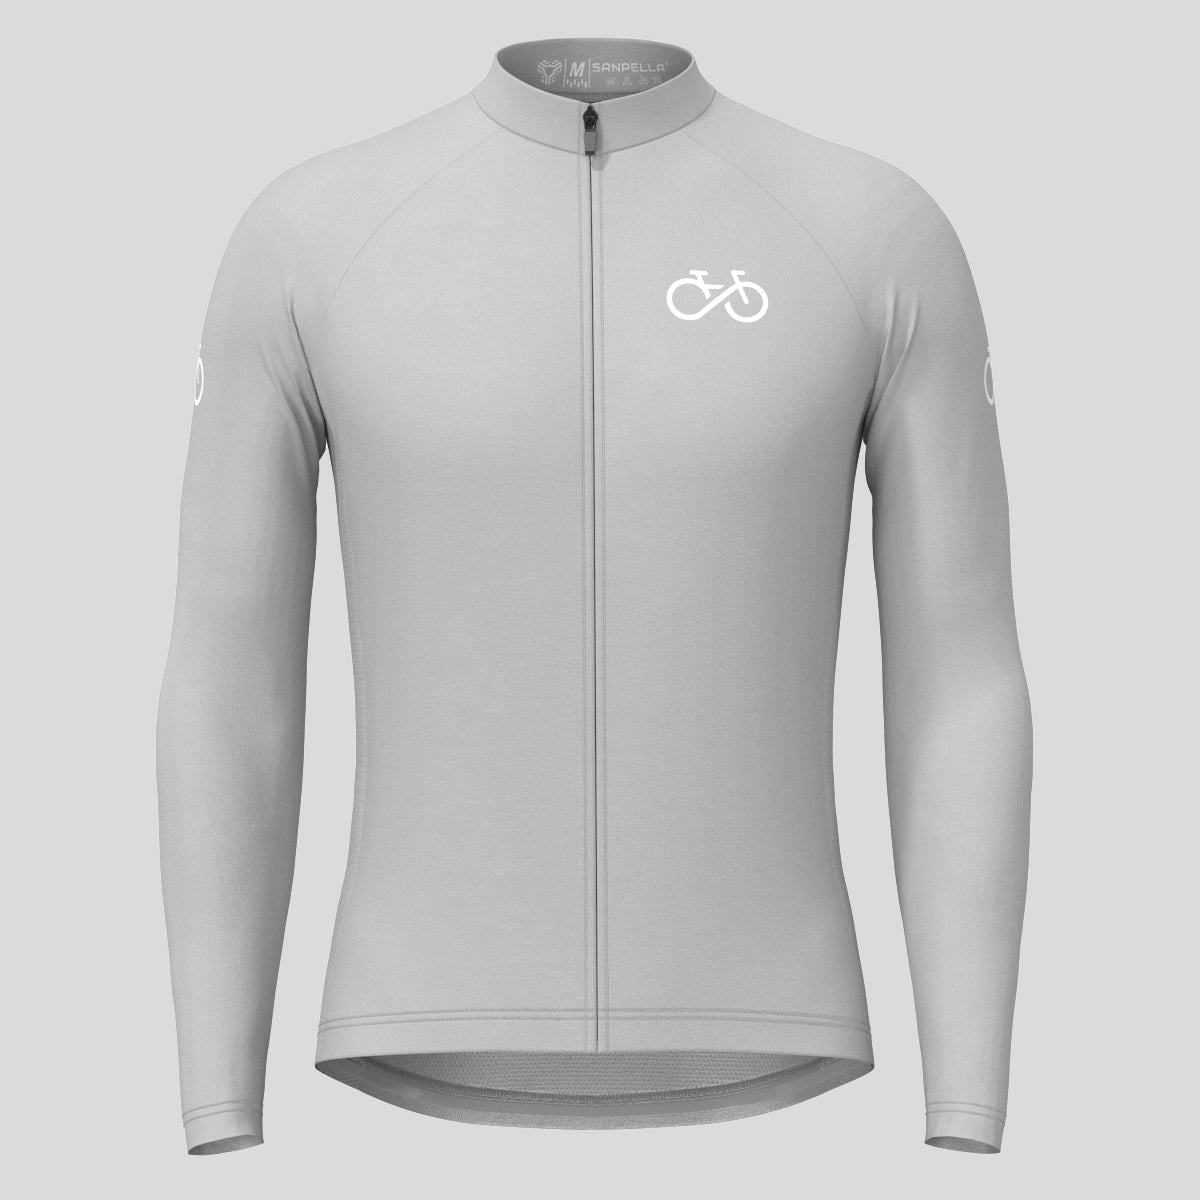 Men's Ride Forever LS Cycling Jersey - Gray